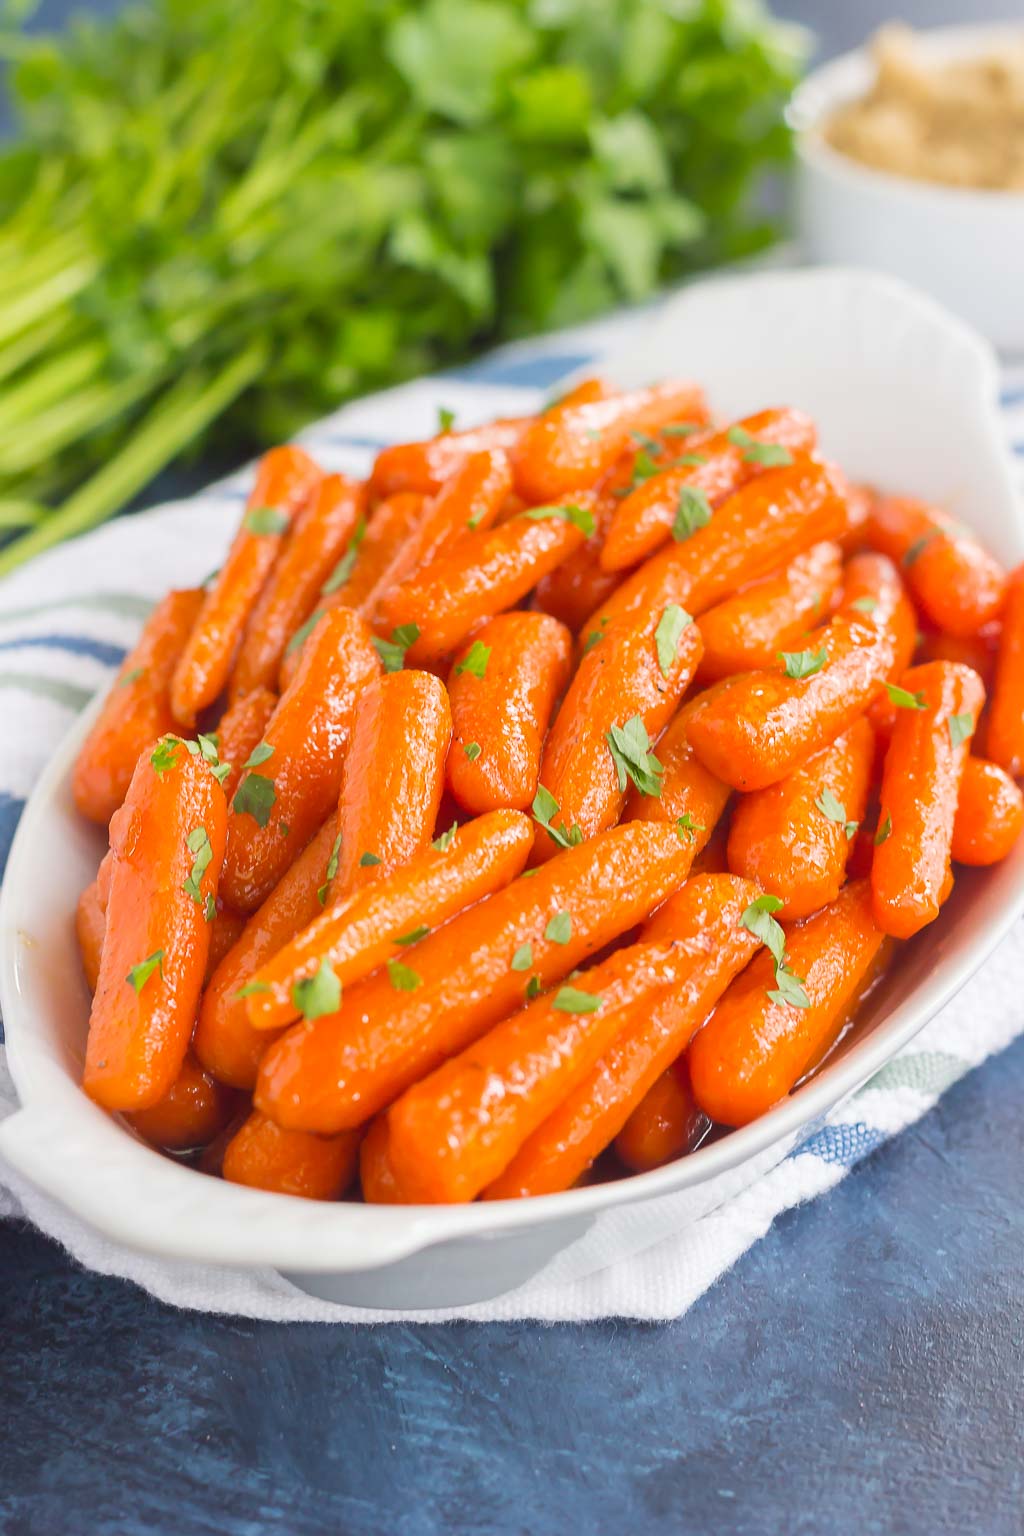 brown sugar baby carrots in a white dish